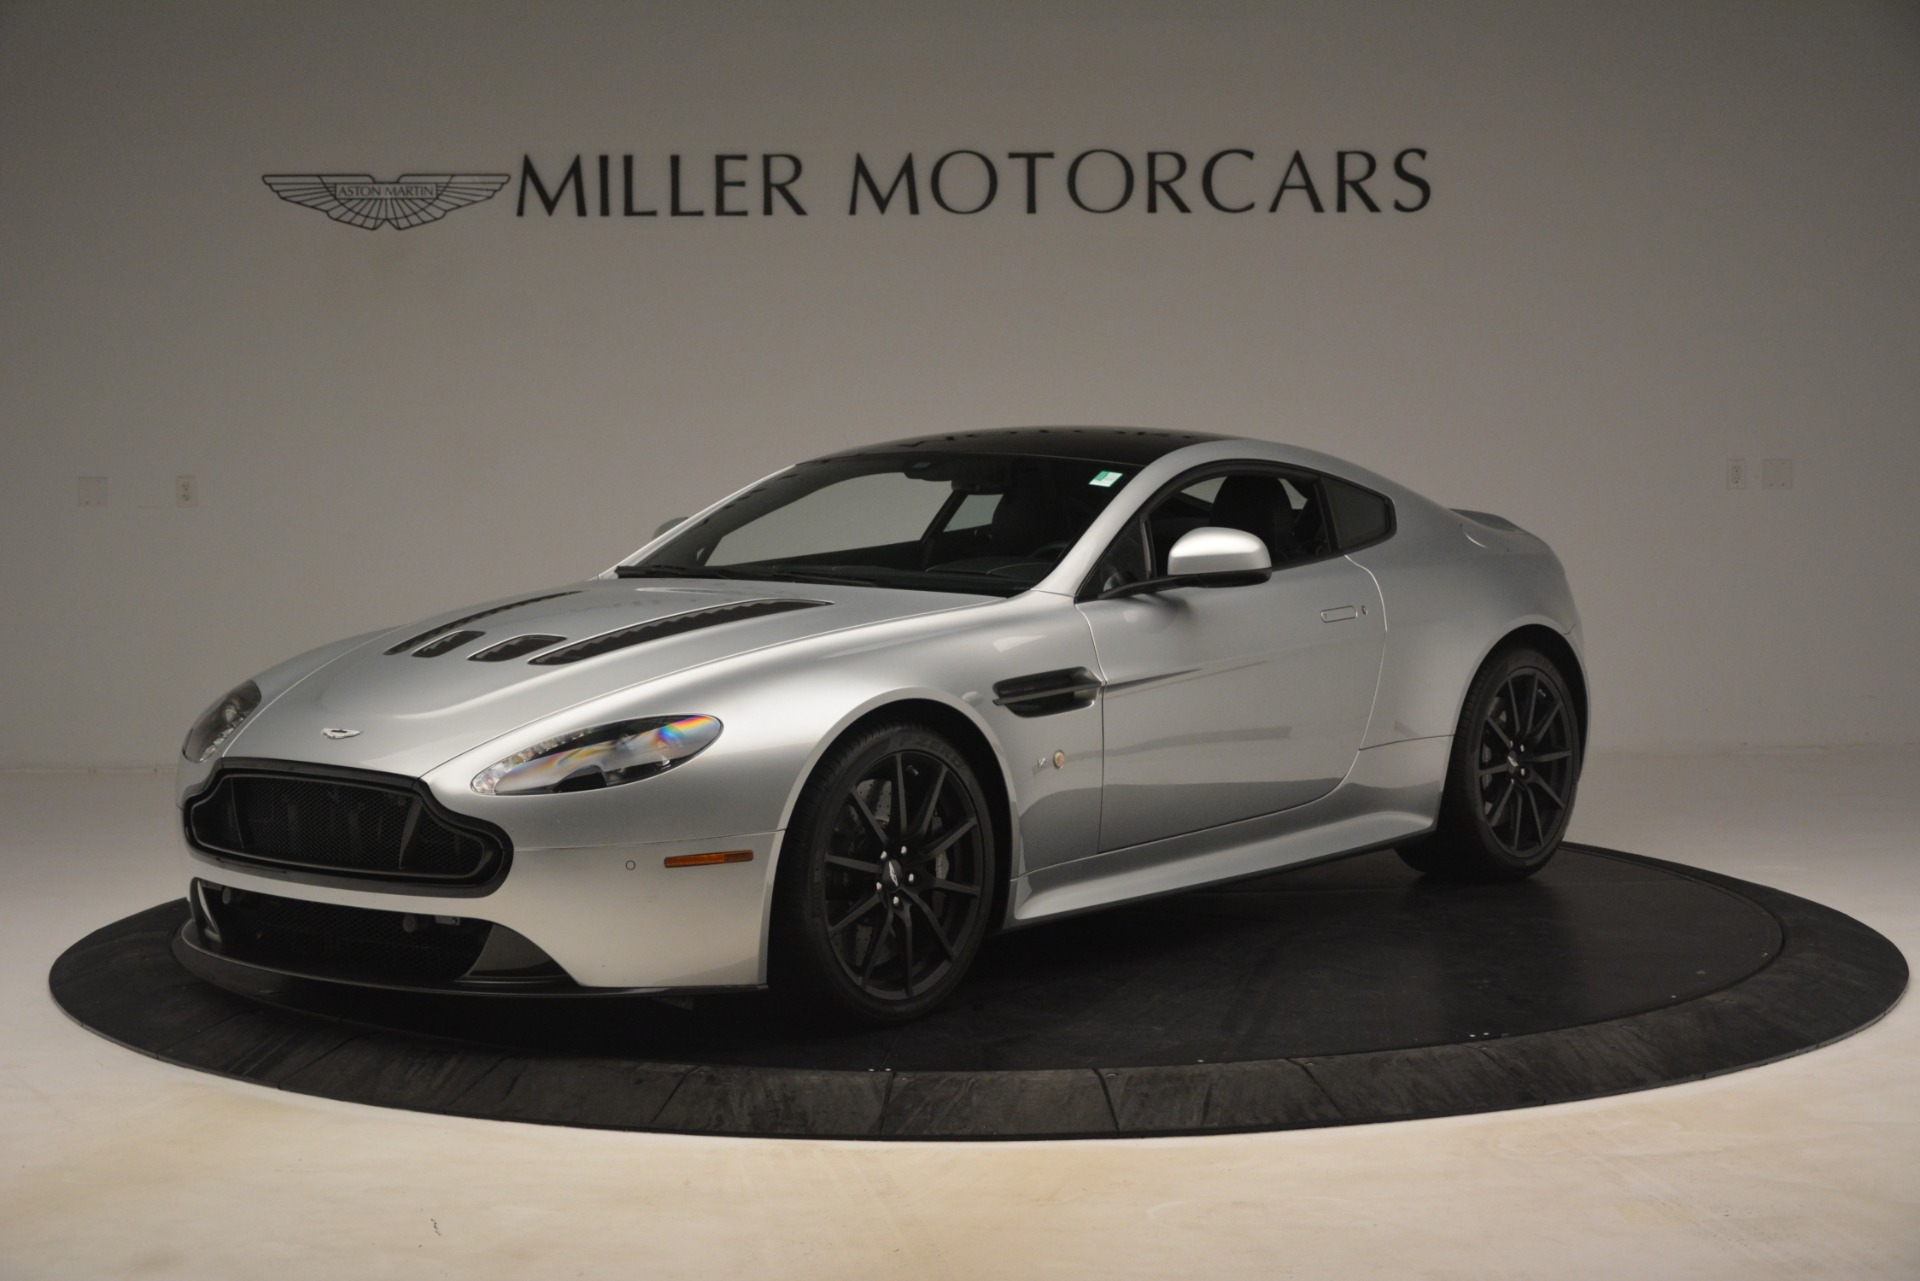 Used 2015 Aston Martin V12 Vantage S Coupe for sale Sold at Bentley Greenwich in Greenwich CT 06830 1